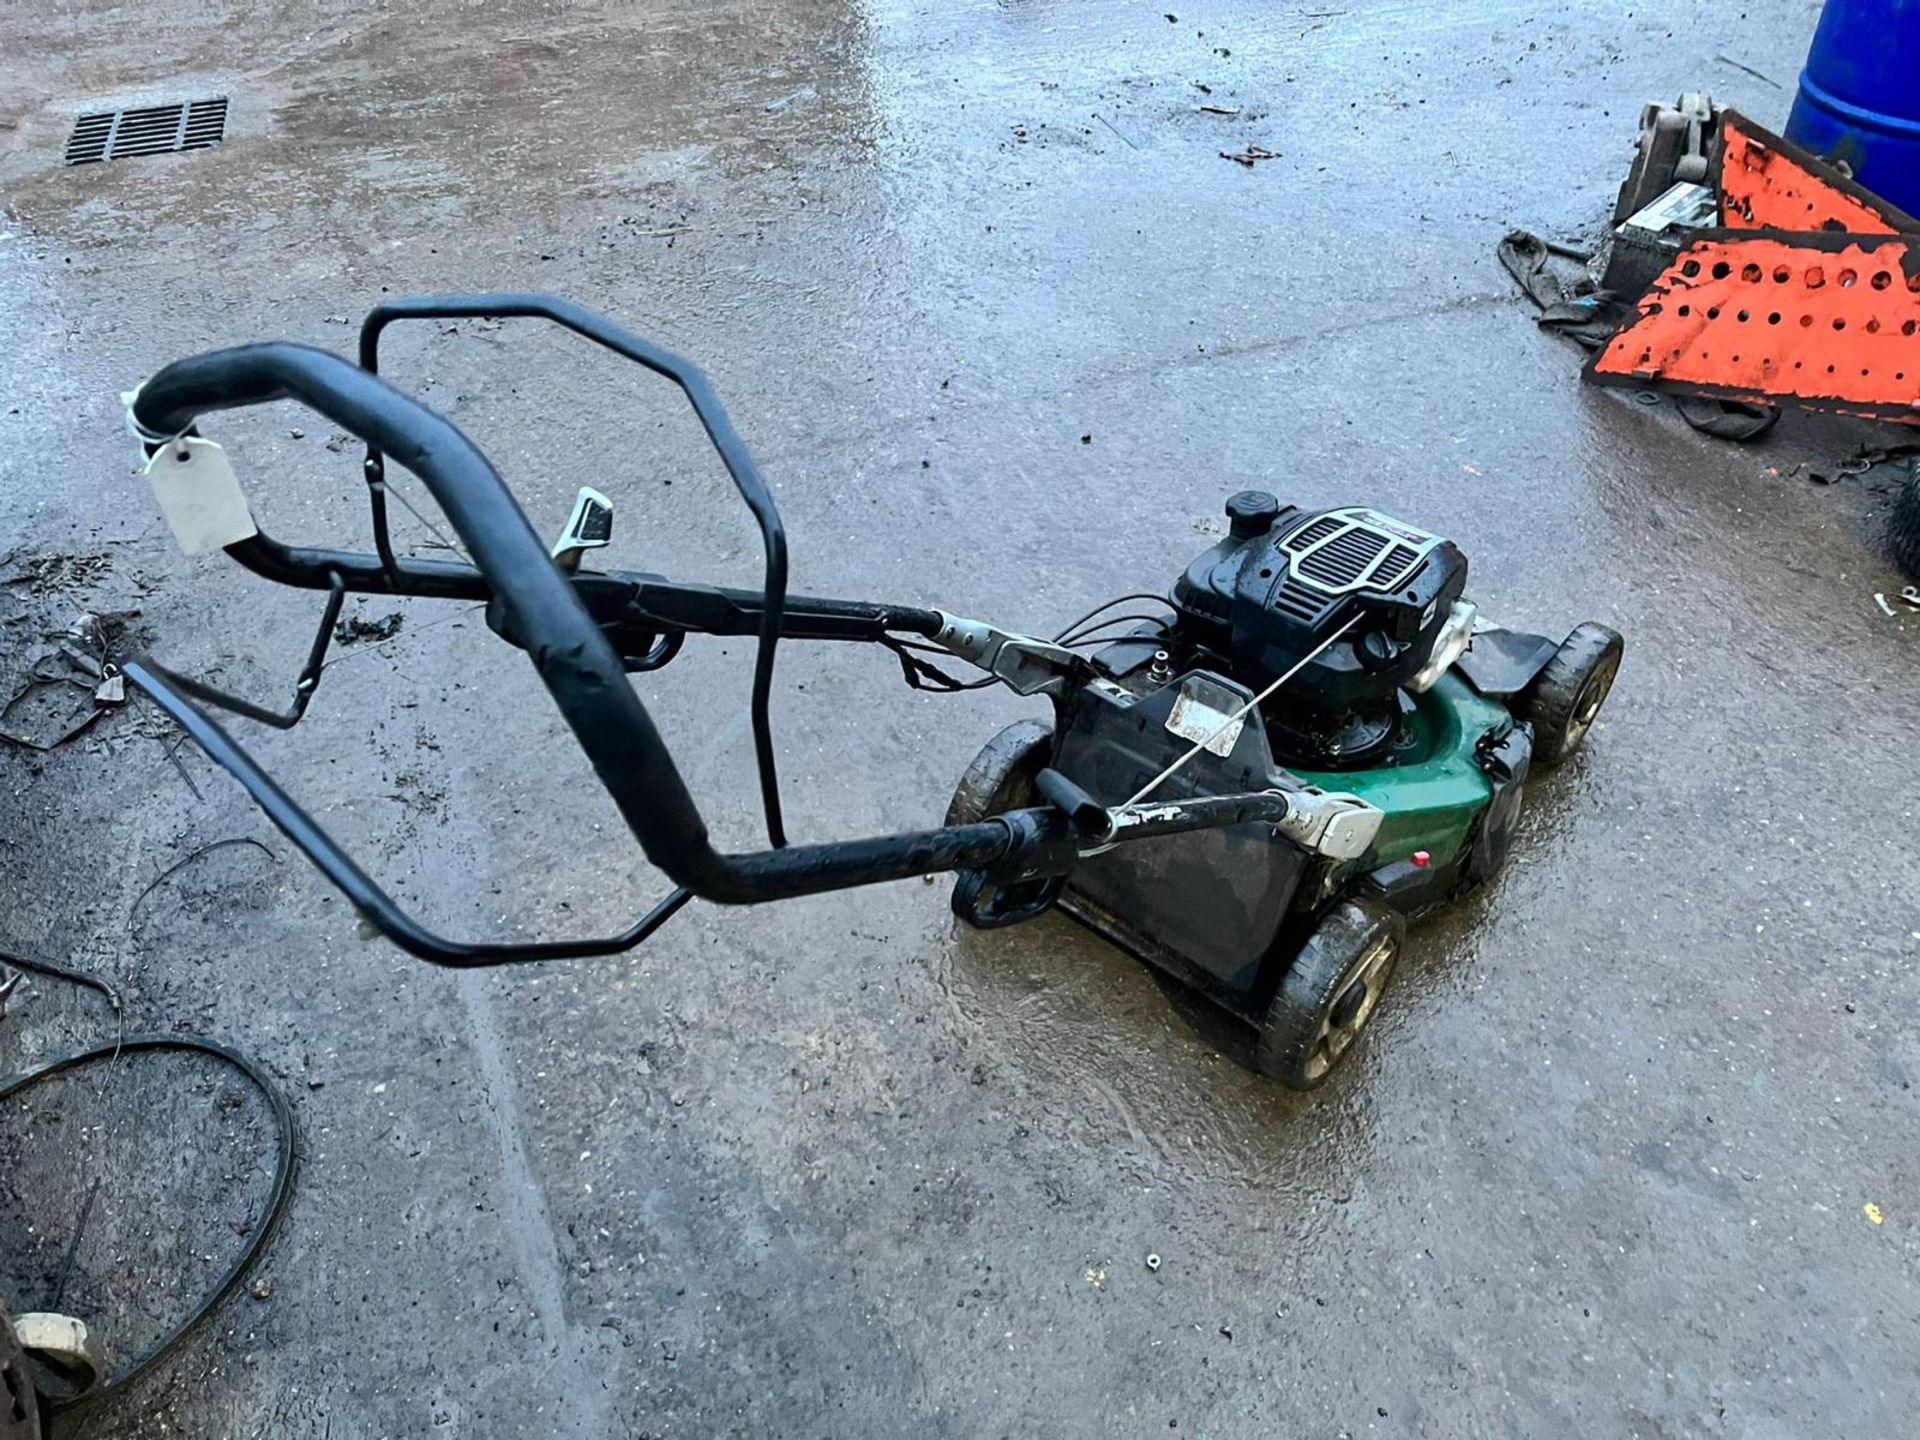 2018 ATCO QUATTRO 22SV SELF PROPELLED LAWN MOWER, GOOD COMPRESSION, SELF PROPELLED *NO VAT* - Image 5 of 7